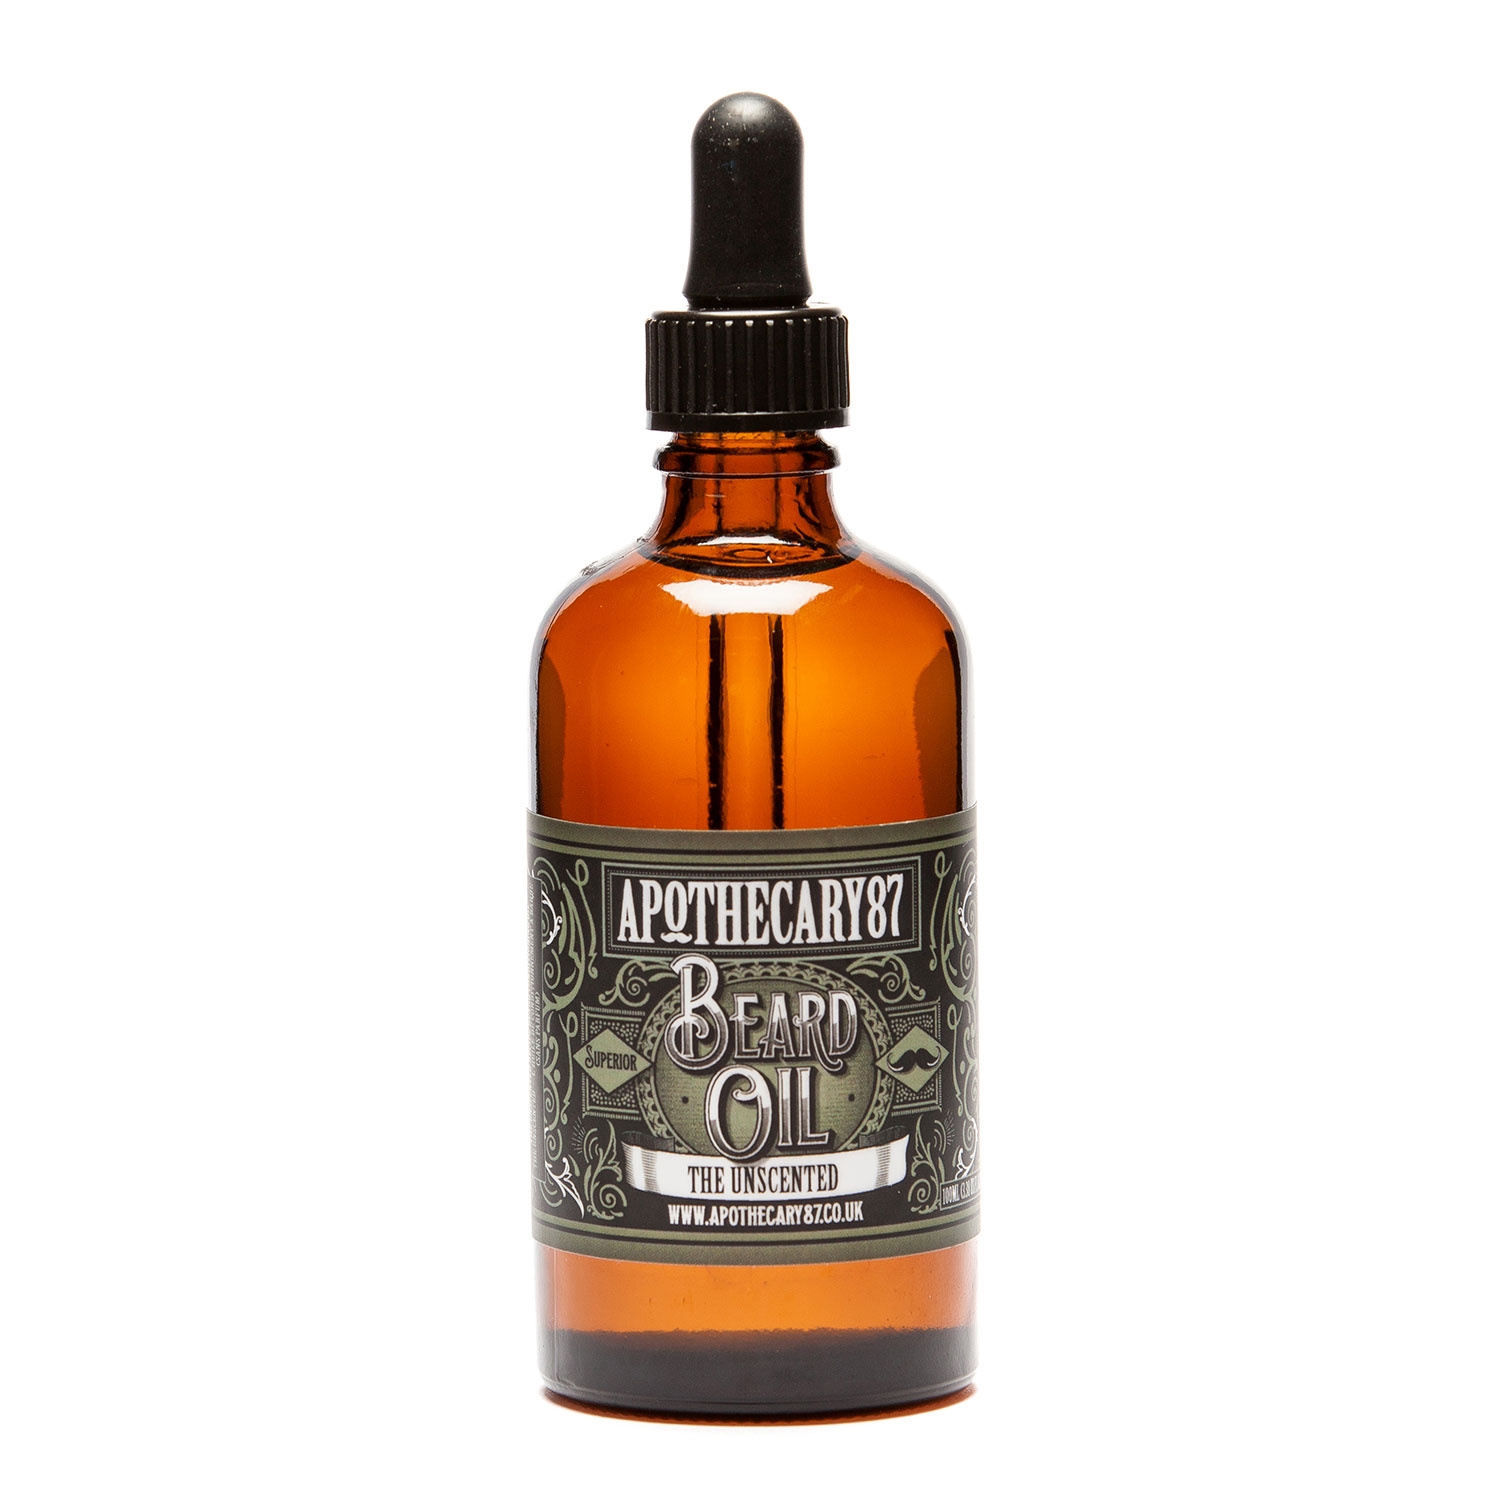 Produktbild von Apothecary87 Grooming - The Unscented Beard Oil